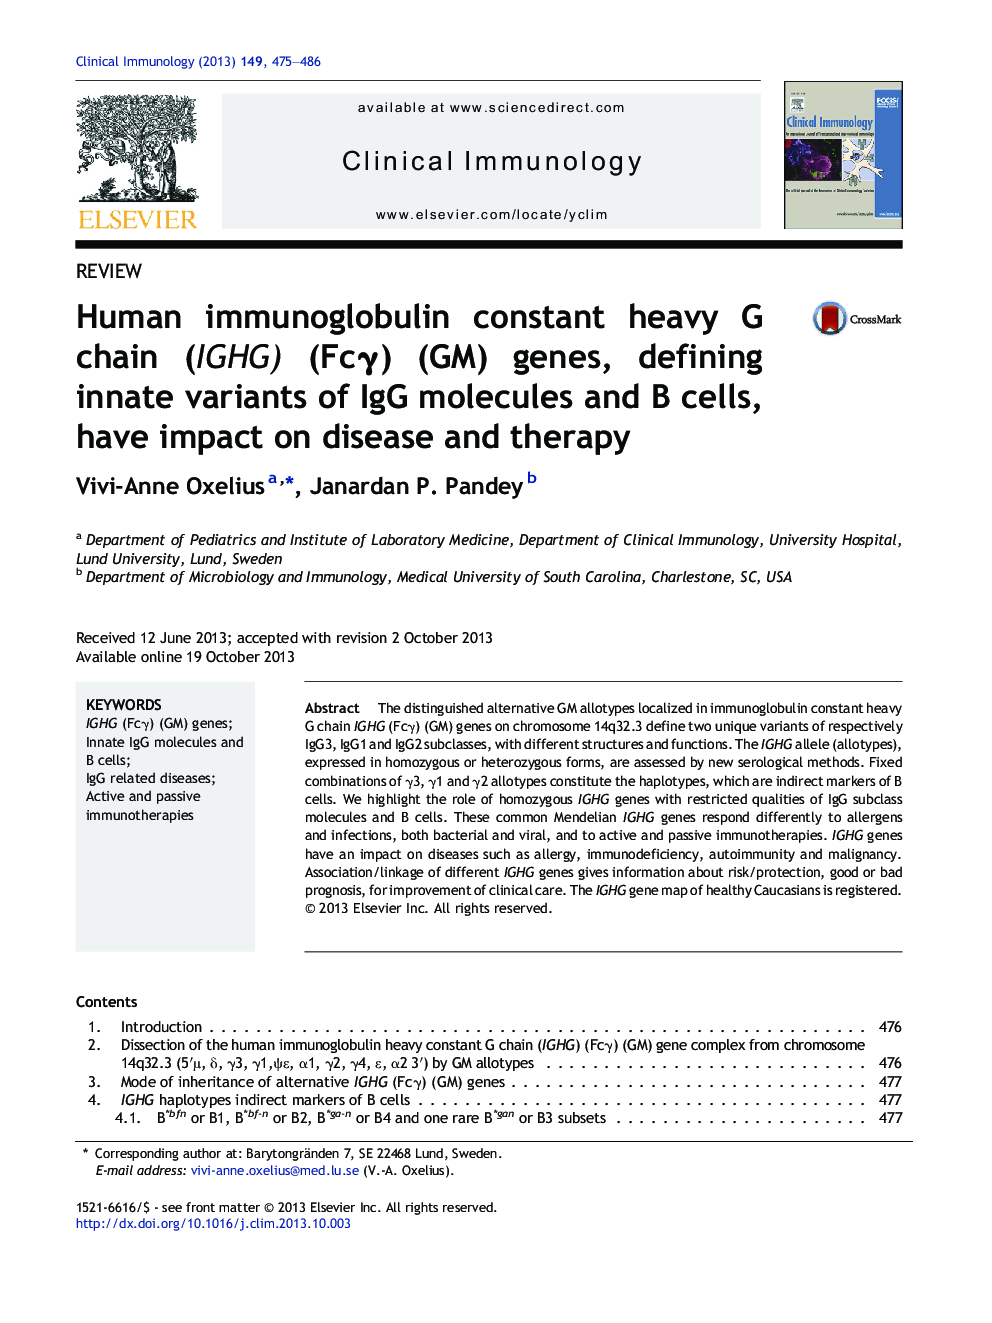 ReviewHuman immunoglobulin constant heavy G chain (IGHG) (FcÎ³) (GM) genes, defining innate variants of IgG molecules and B cells, have impact on disease and therapy